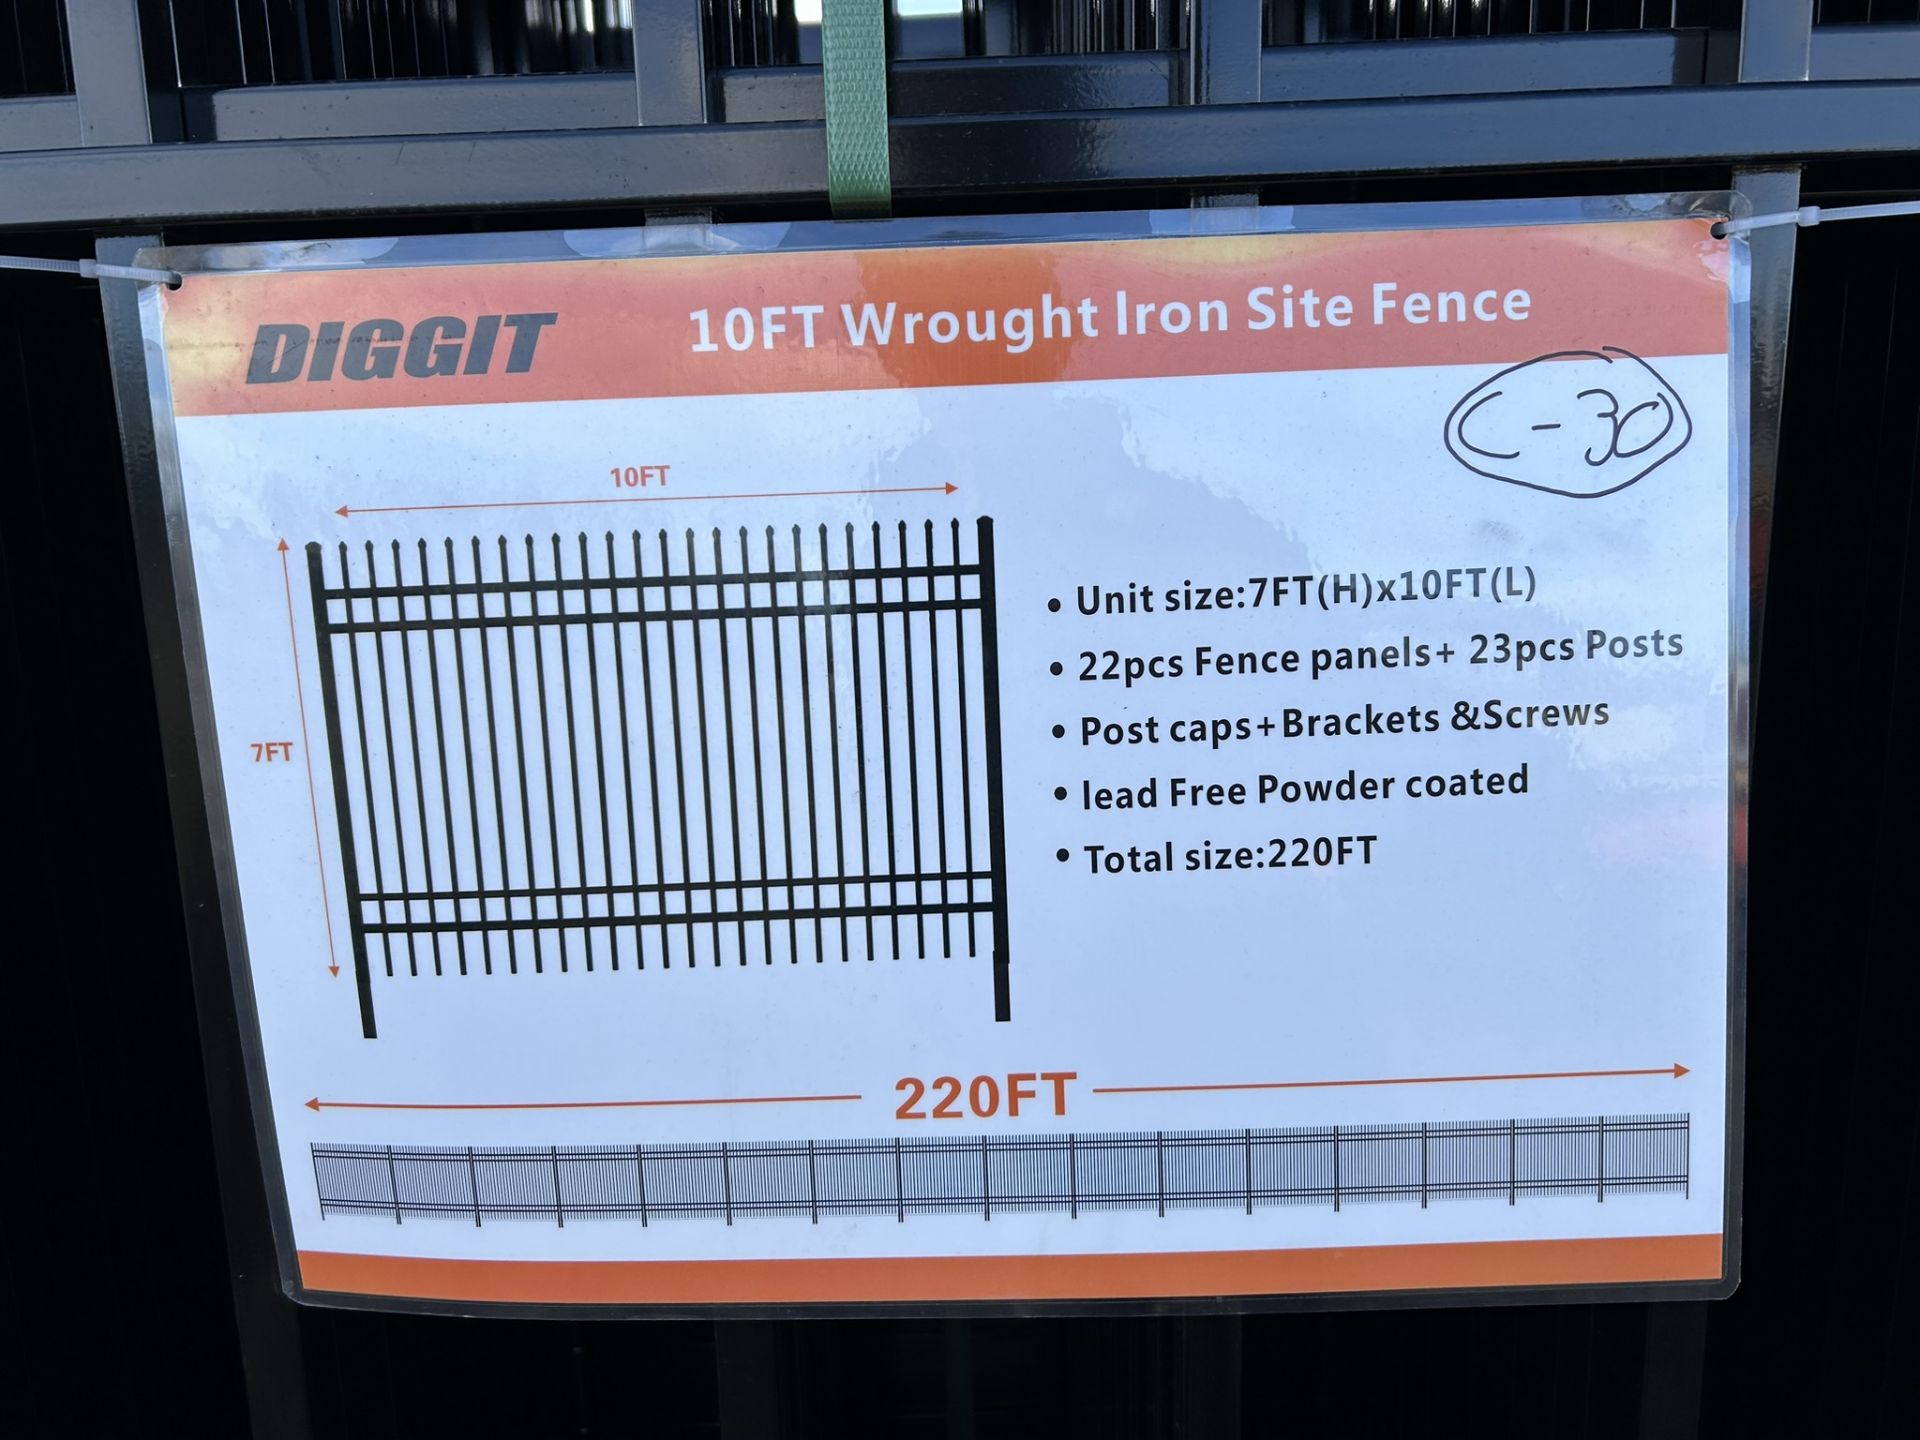 DIGGIT 10 FT ROD IRON SITE SITE FENCES - 22 PANELS 7 FT HIGH - Image 6 of 6